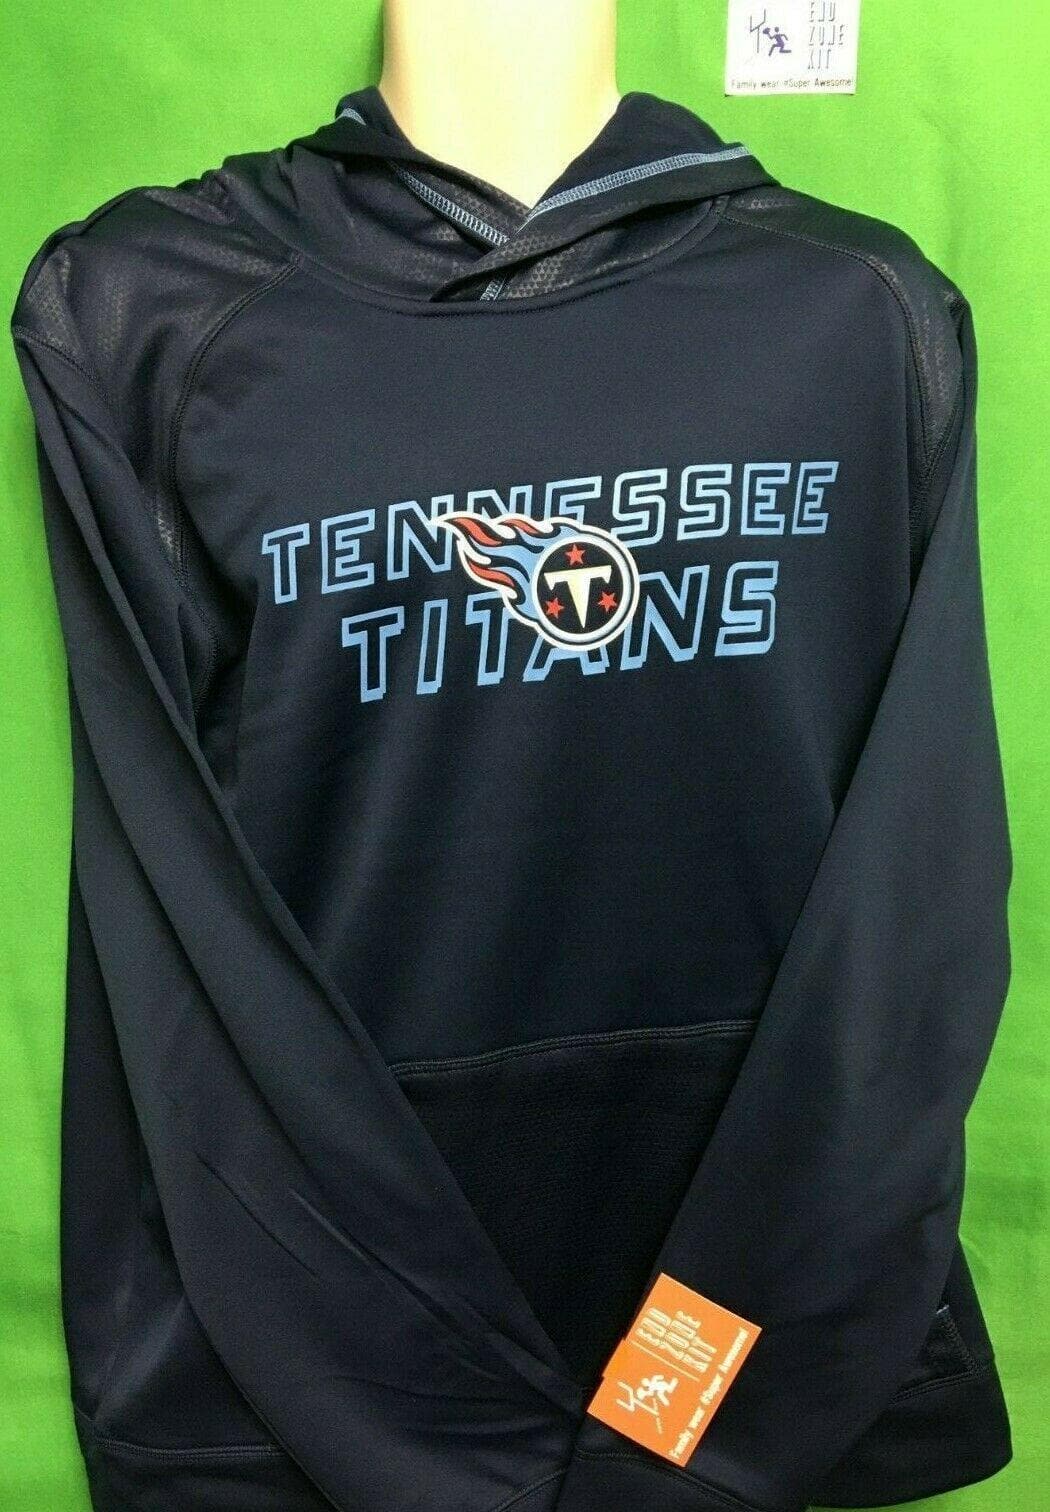 NFL Tennessee Titans TX3 Warm Pullover Hoodie Men's X-Large NWT